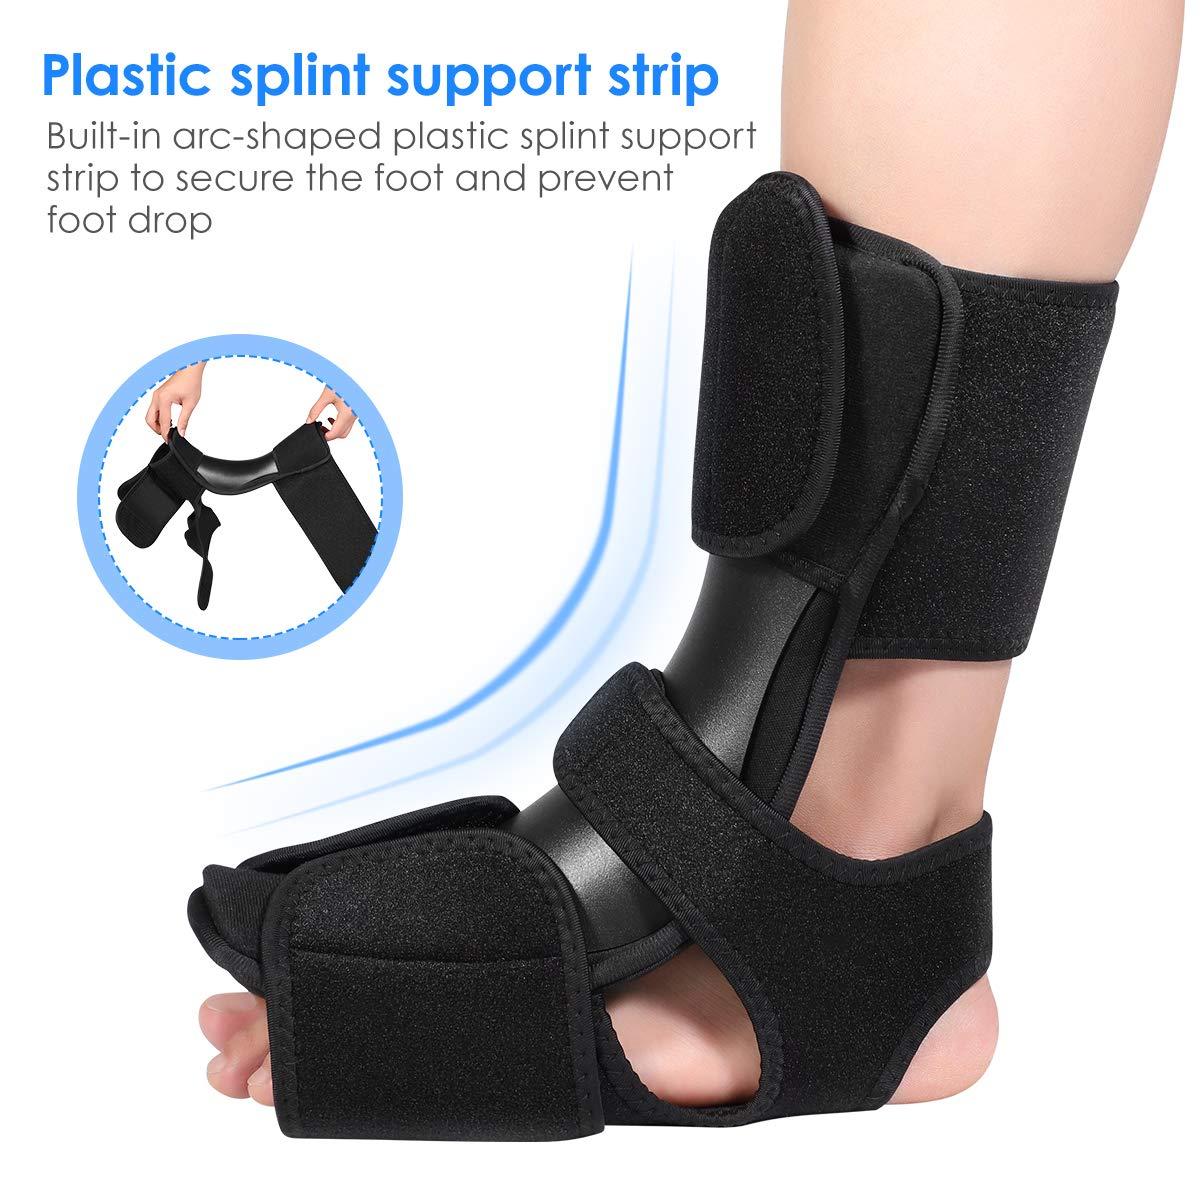 ZUKETANG Brace for Foot Drop, Plantar Fasciitis Splint,Day/Night Dorsal  Splint,Foot Up Brace Prevent Dragging, for Neuropathy Walking Exercise  Assist, Gait Lifting Support,right-L : : Health & Personal Care